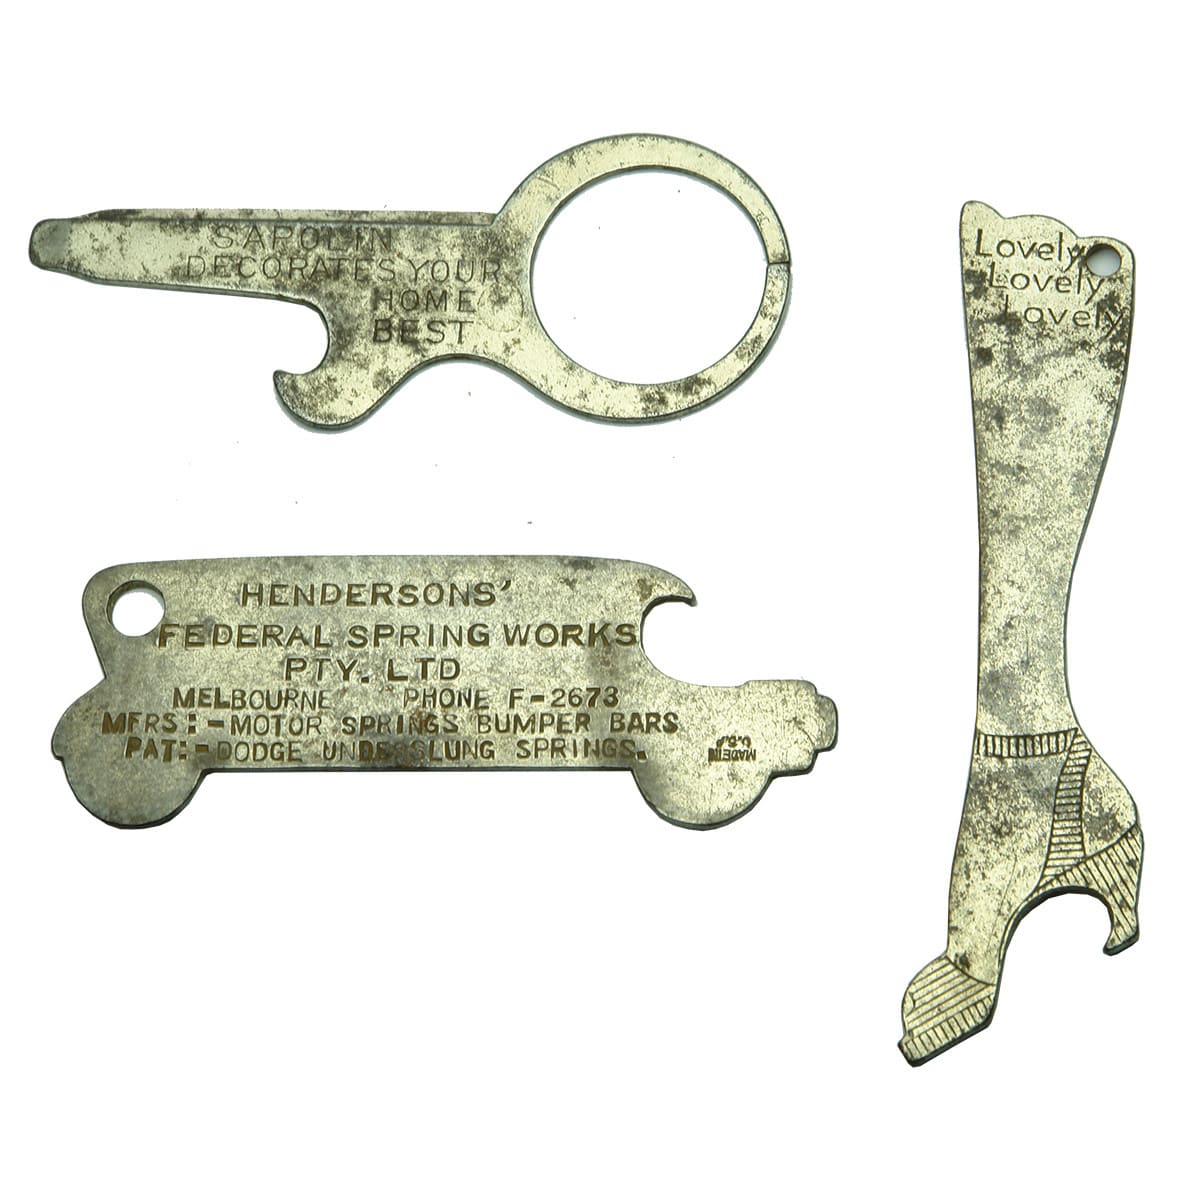 Openers. Three advertising crown seal openers: Sapolin Decorates Your Home Best; Henderson's Federal Spring Works, Melbourne; Holeproof Hosiery.